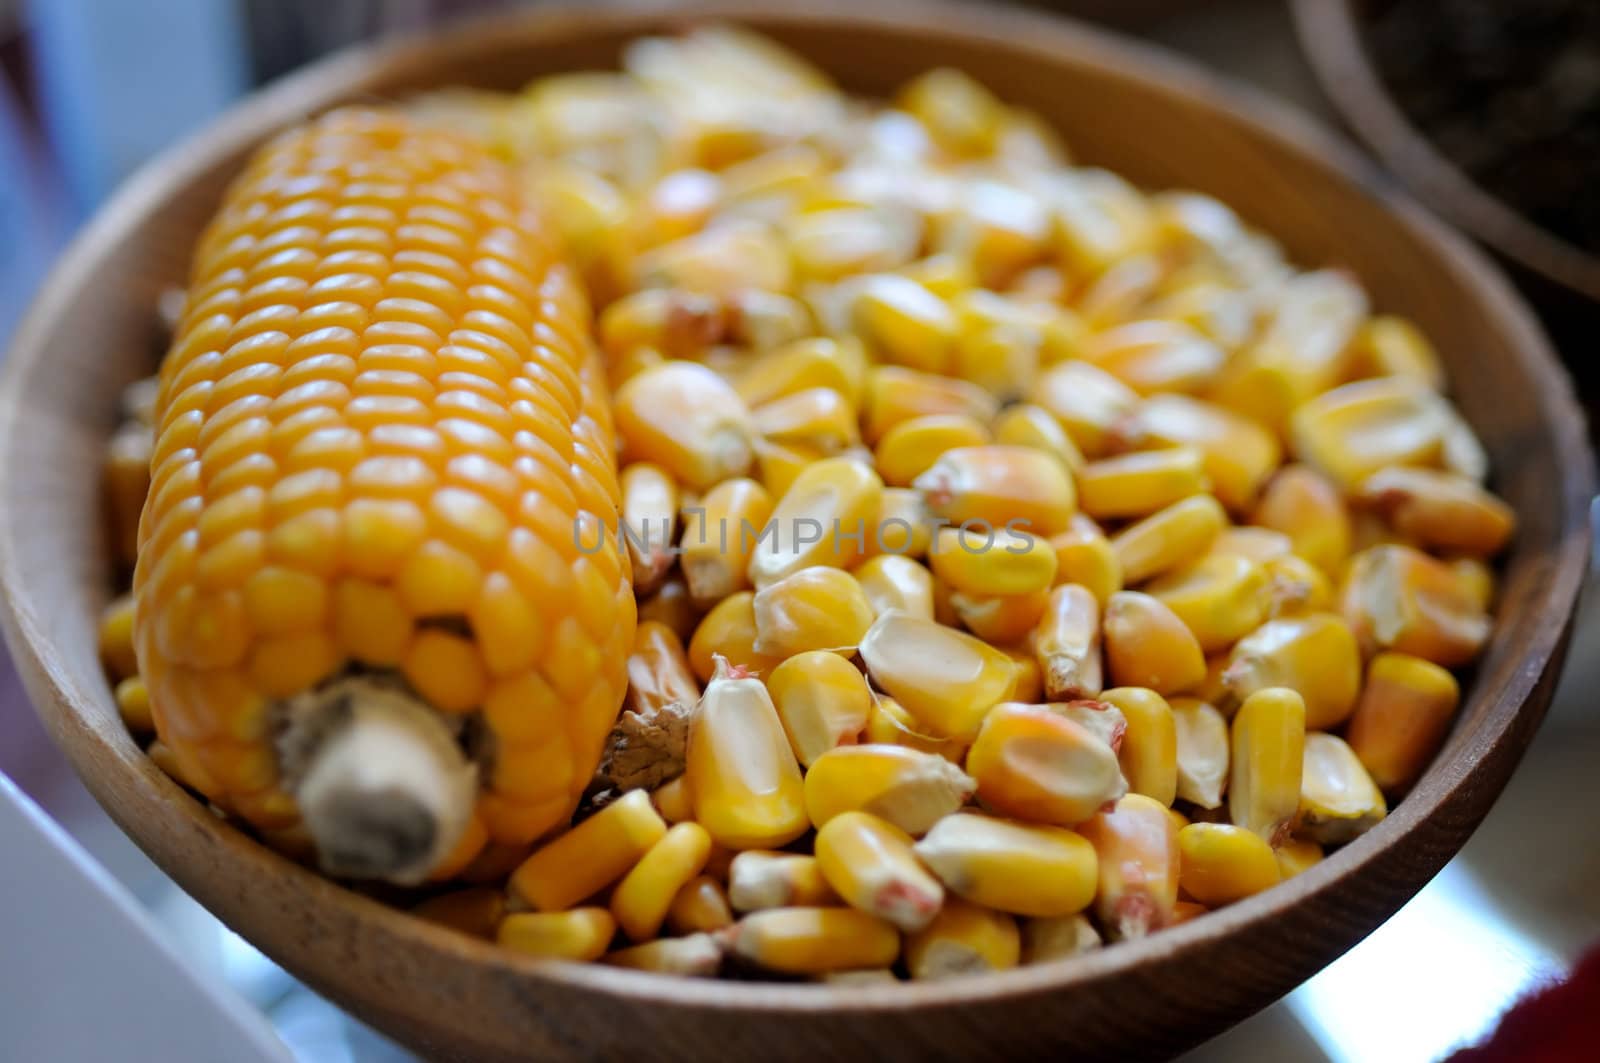 Corn in the small container by Sevaljevic